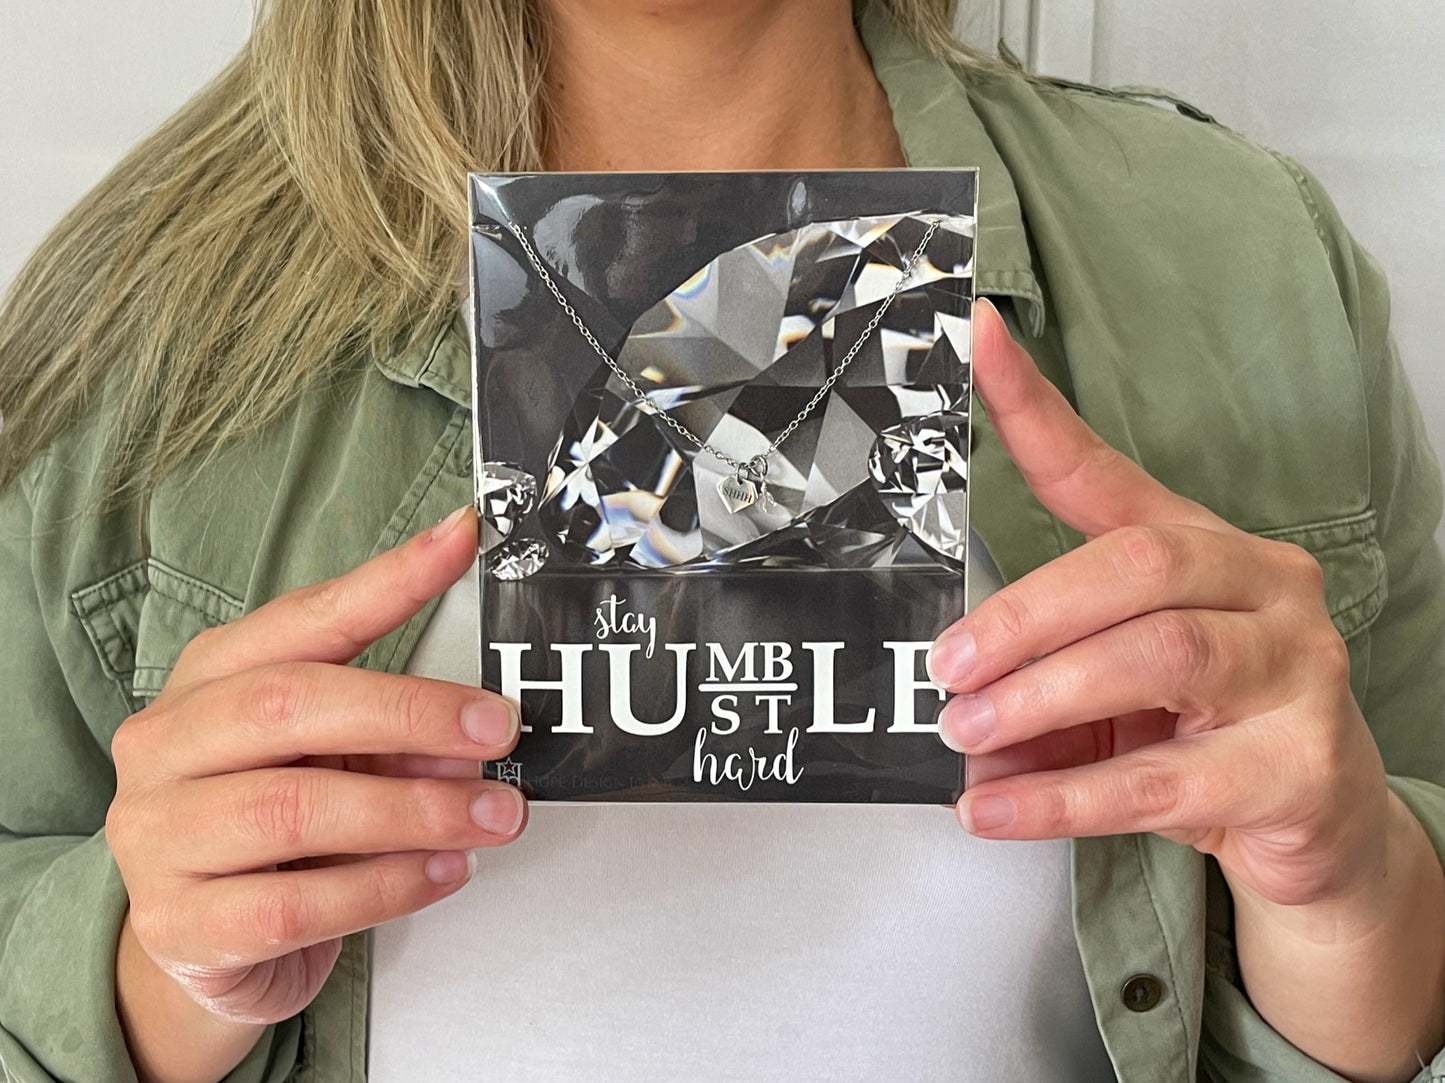 SHHH | Stay Humble Hustle Hard Necklace